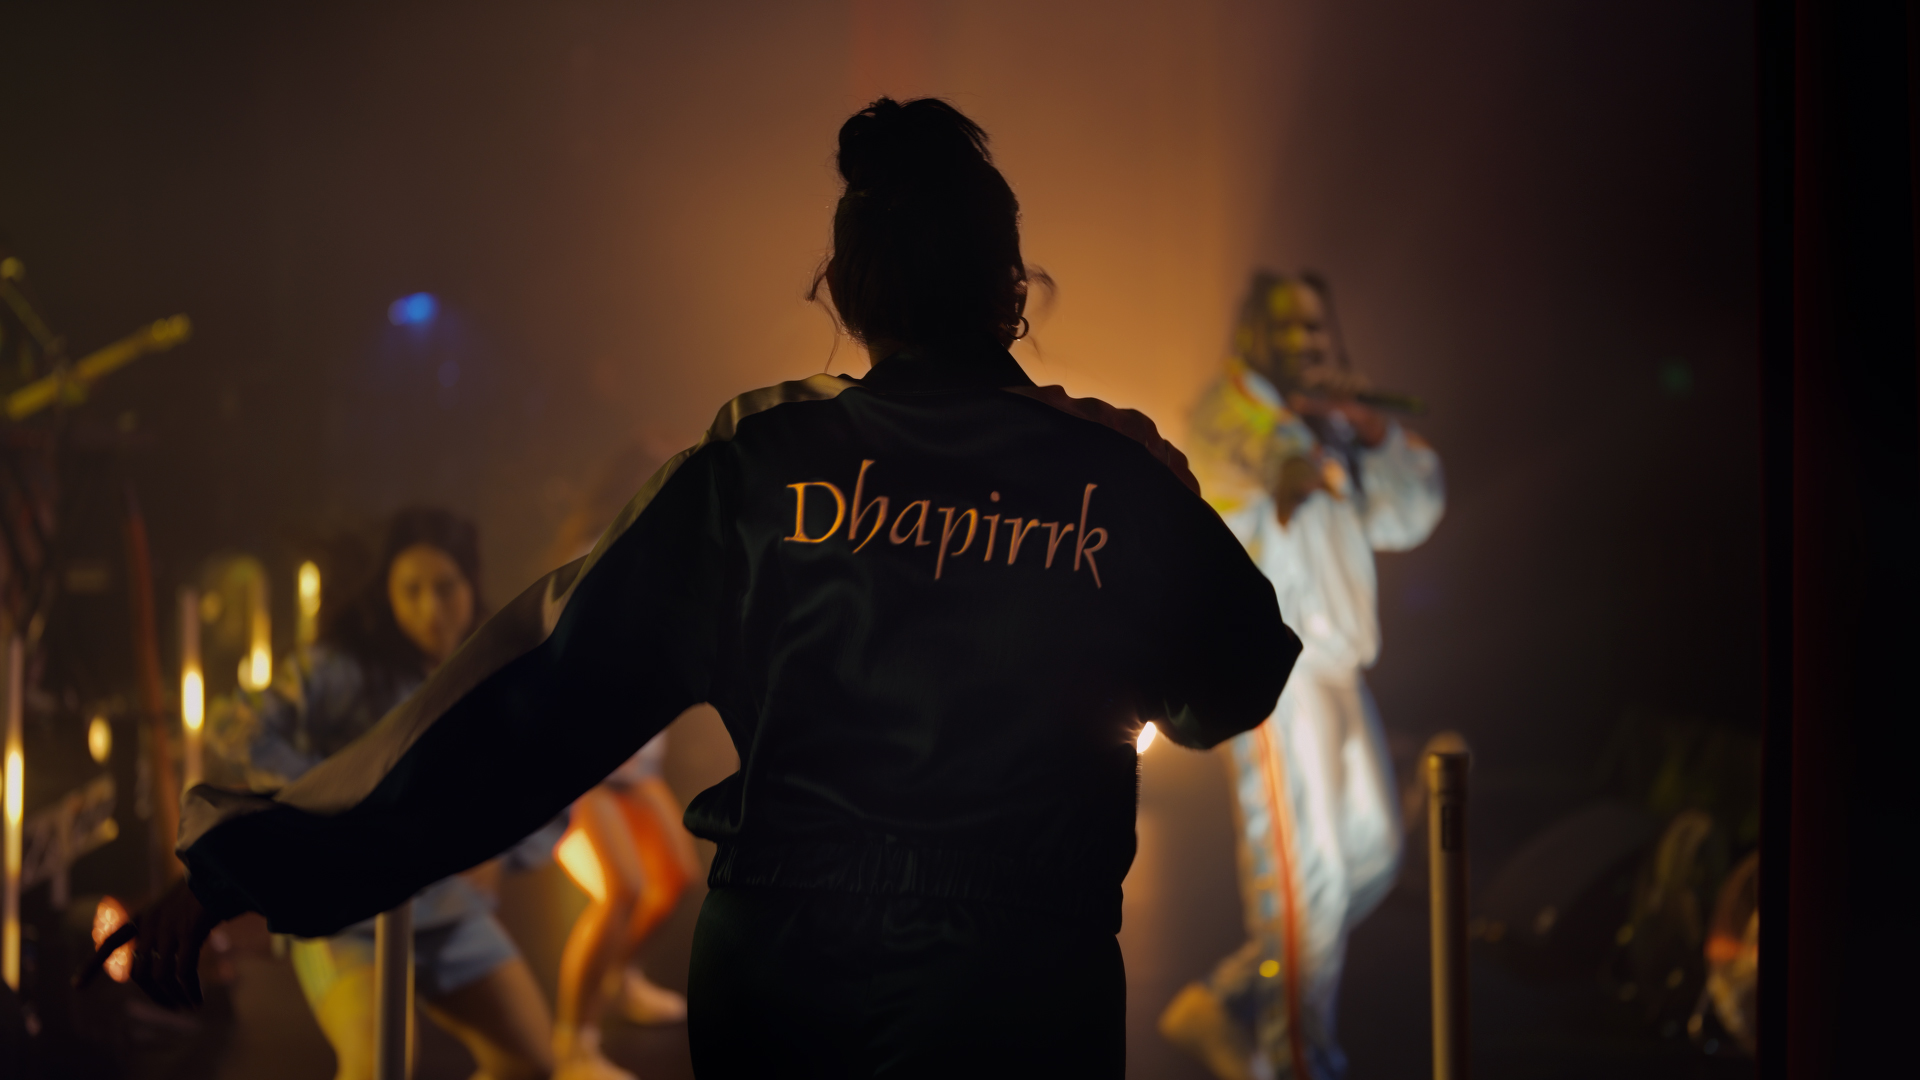 Still from google Helpfulness campaign TVC featuring Baker Boy performing while a young woman in an embroidered jacket looks on